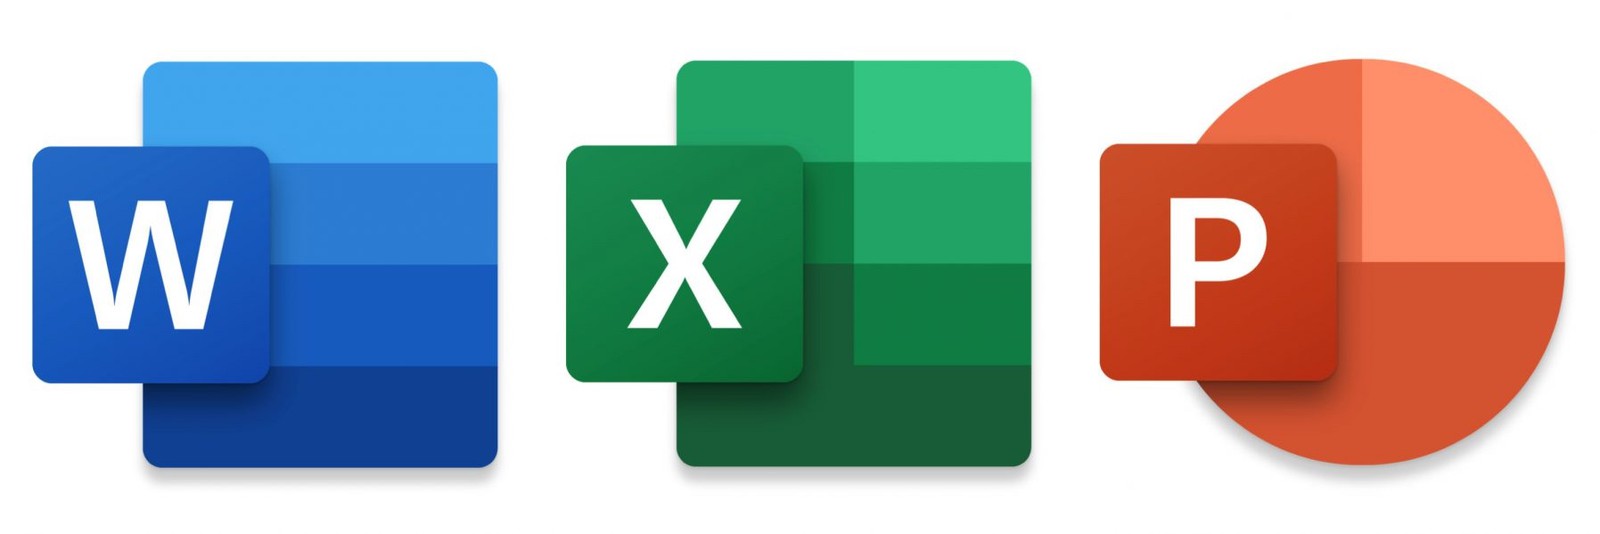 pacote word excel e powerpoint download free